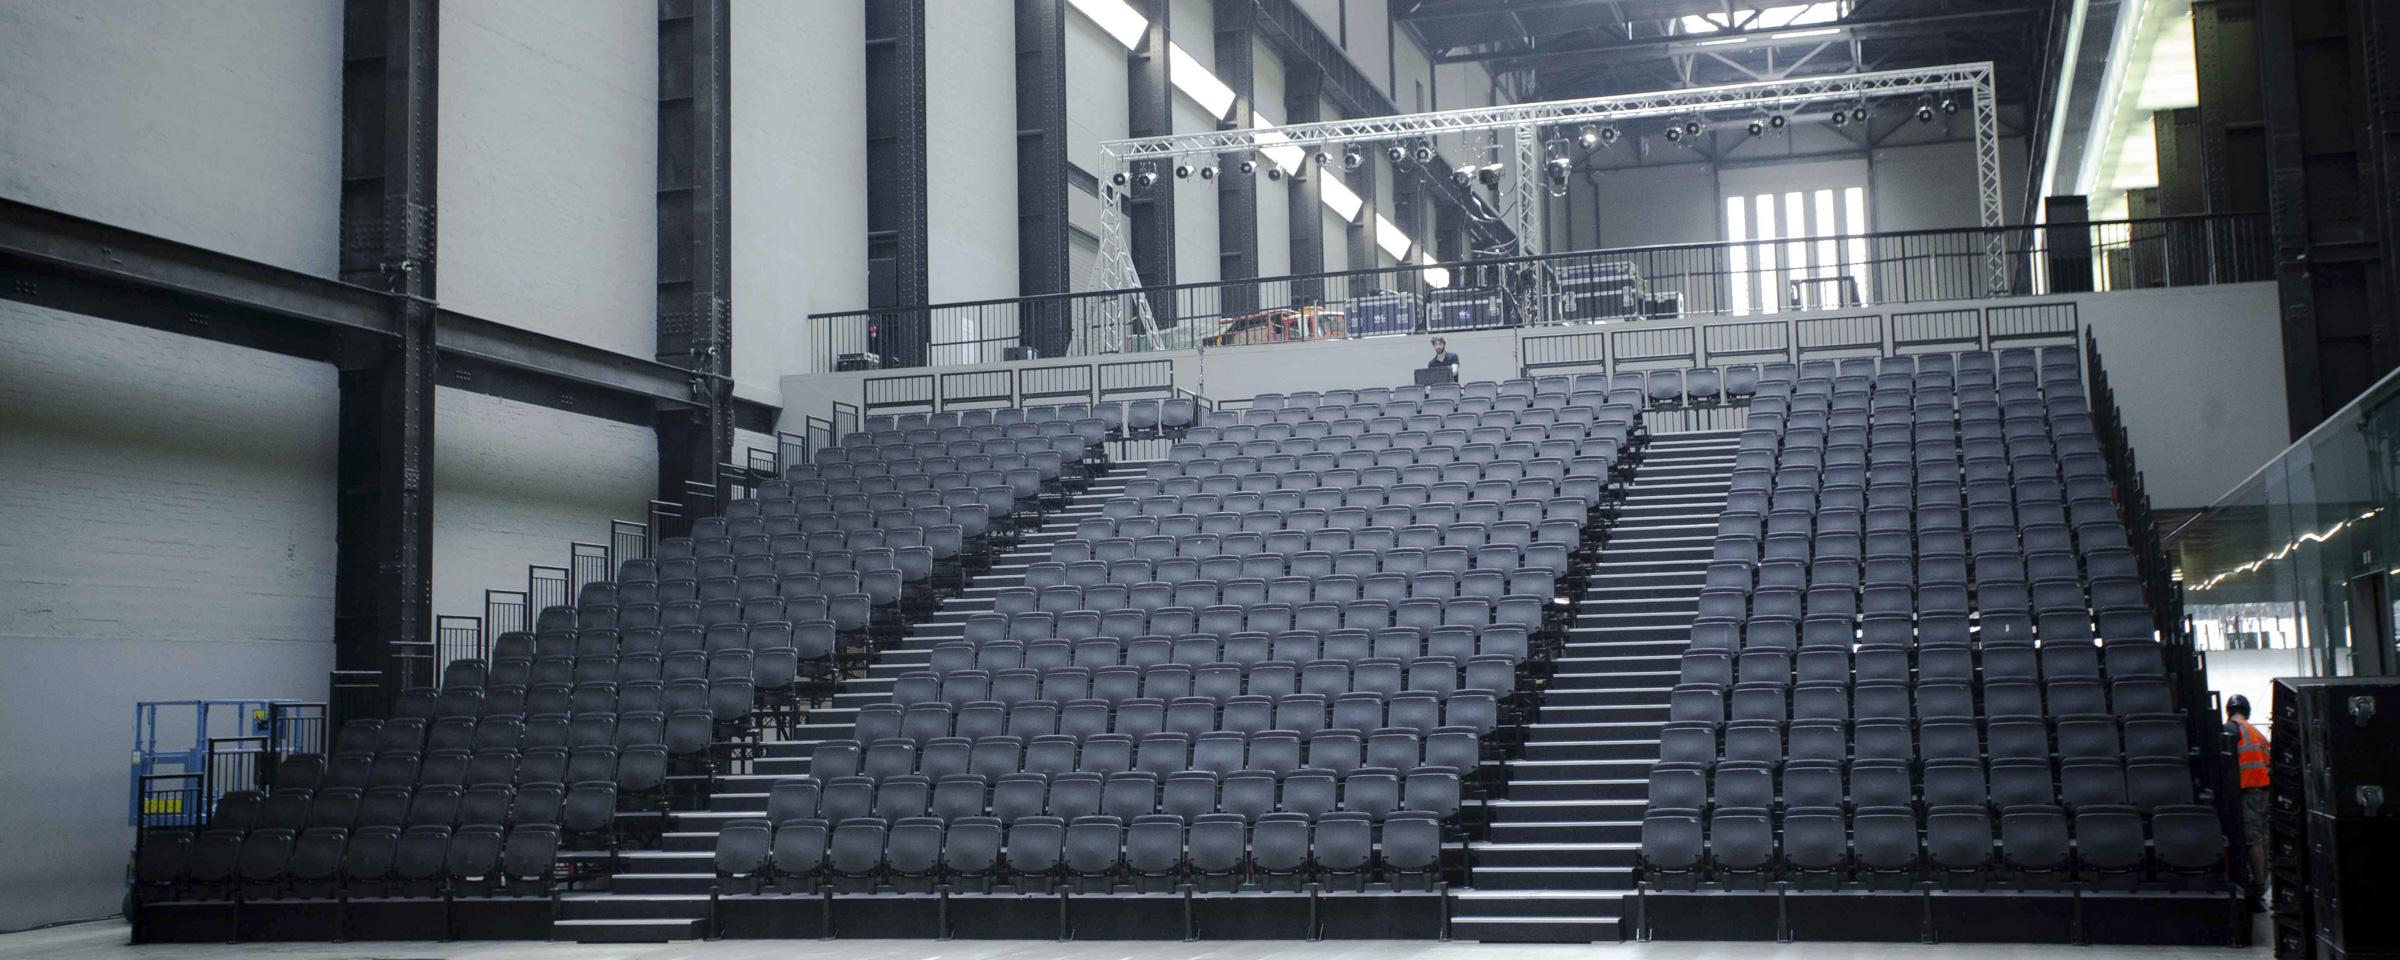 Tiered bleacher seats in a conference/lecture layout